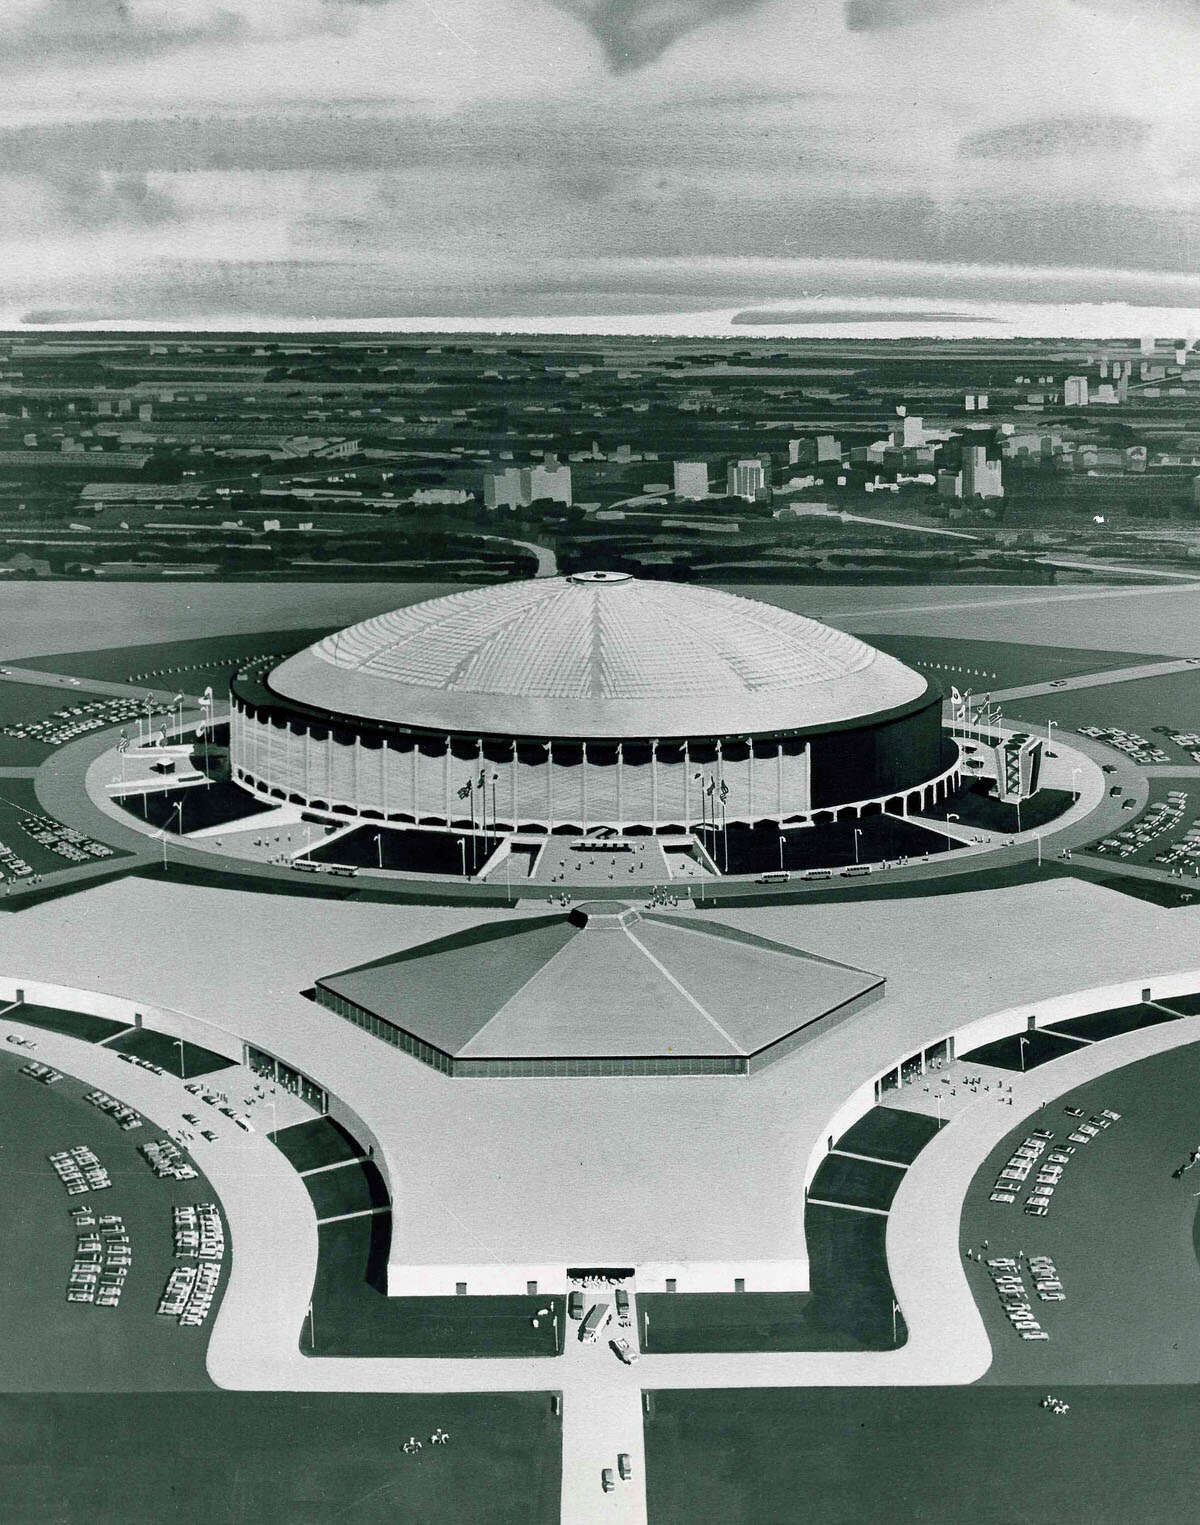 The year 1966 was the first year the Houston Livestock Show and Rodeo was held in the AstroDome. This is a 1965 rendering of the AstroHall as it would look when it was completed.